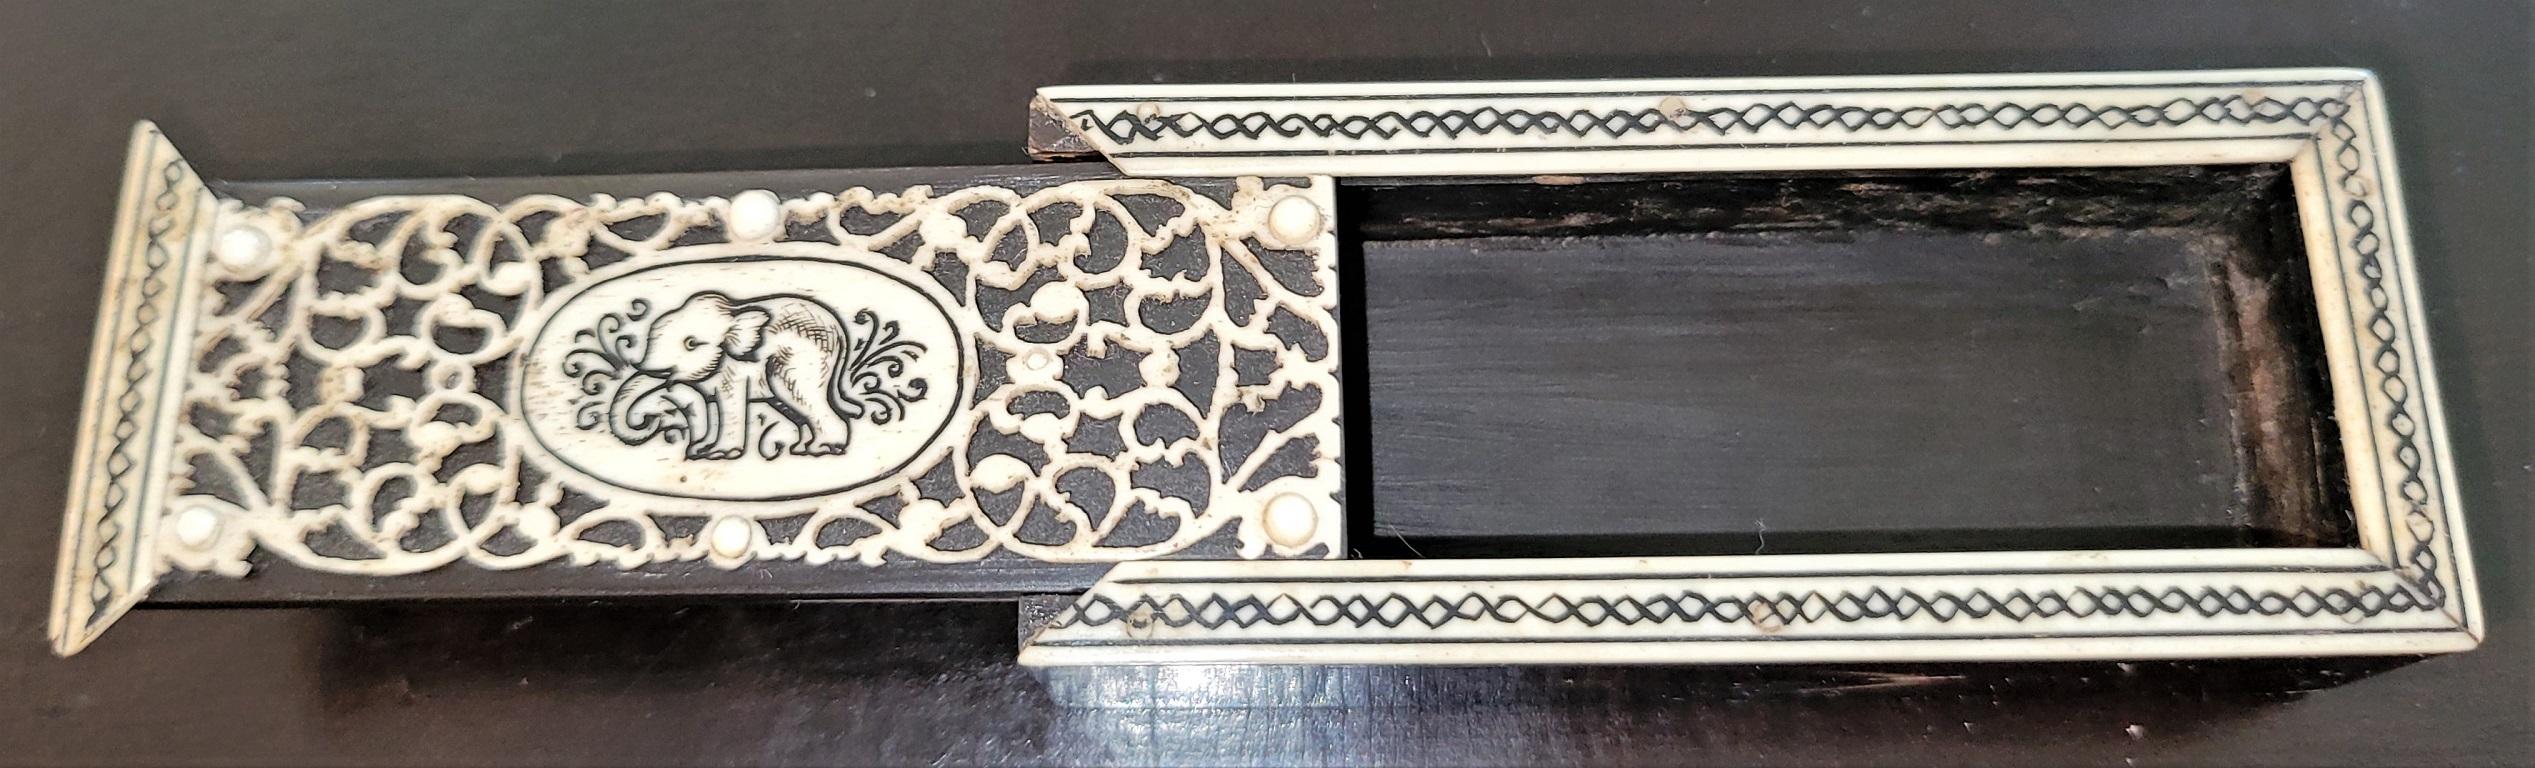 19C Anglo Indian Vizigapatam Stamp Box For Sale 3